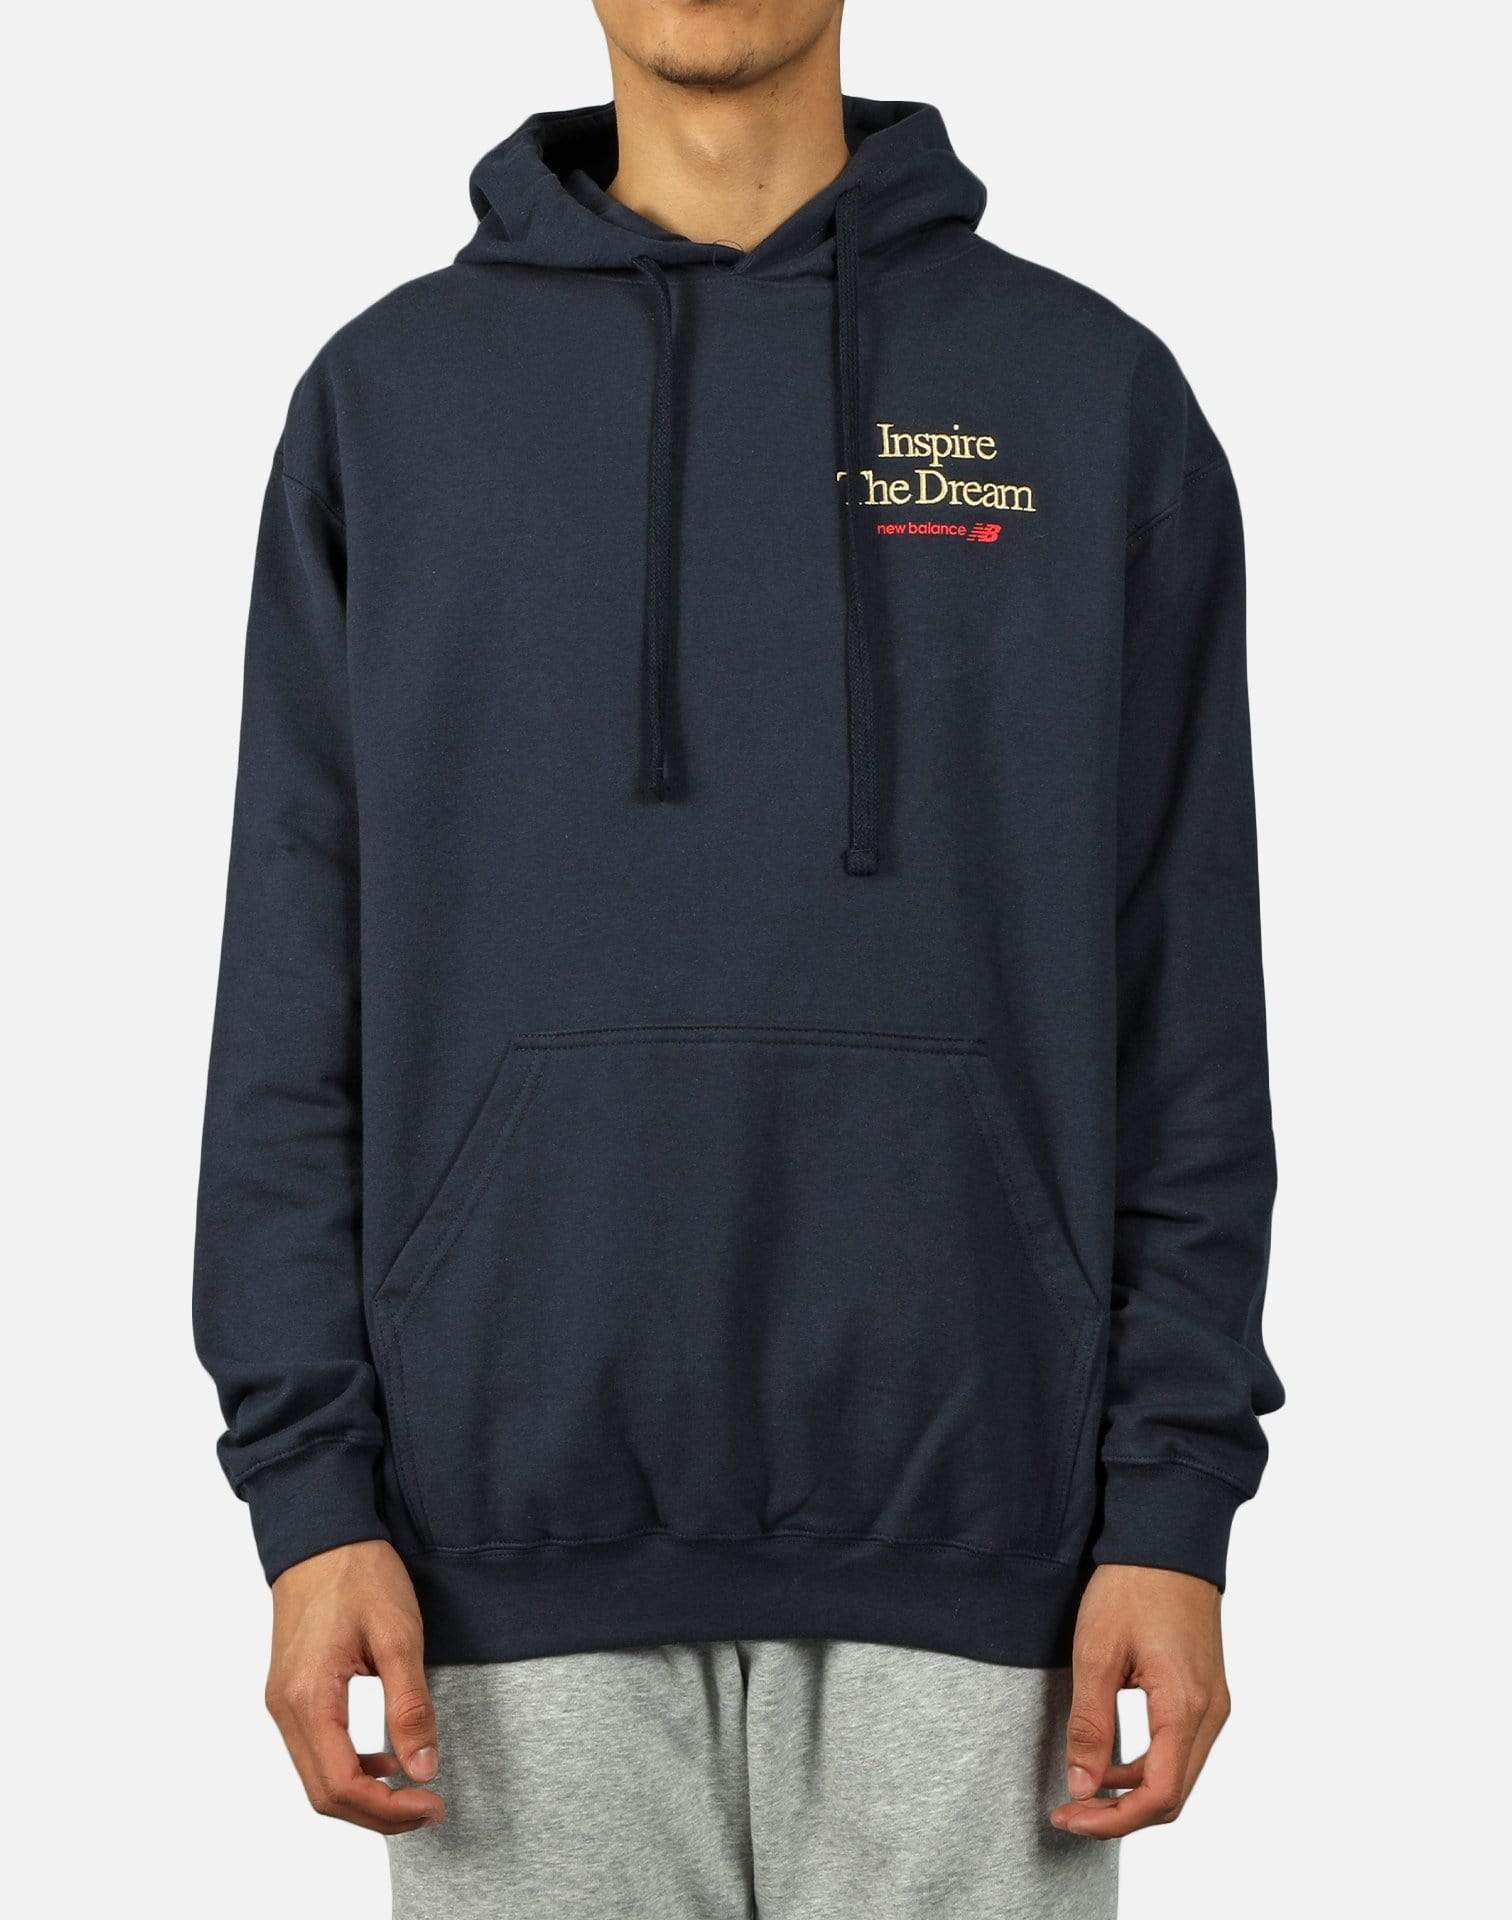 New Balance INSPIRE THE DREAM HOODIE – DTLR